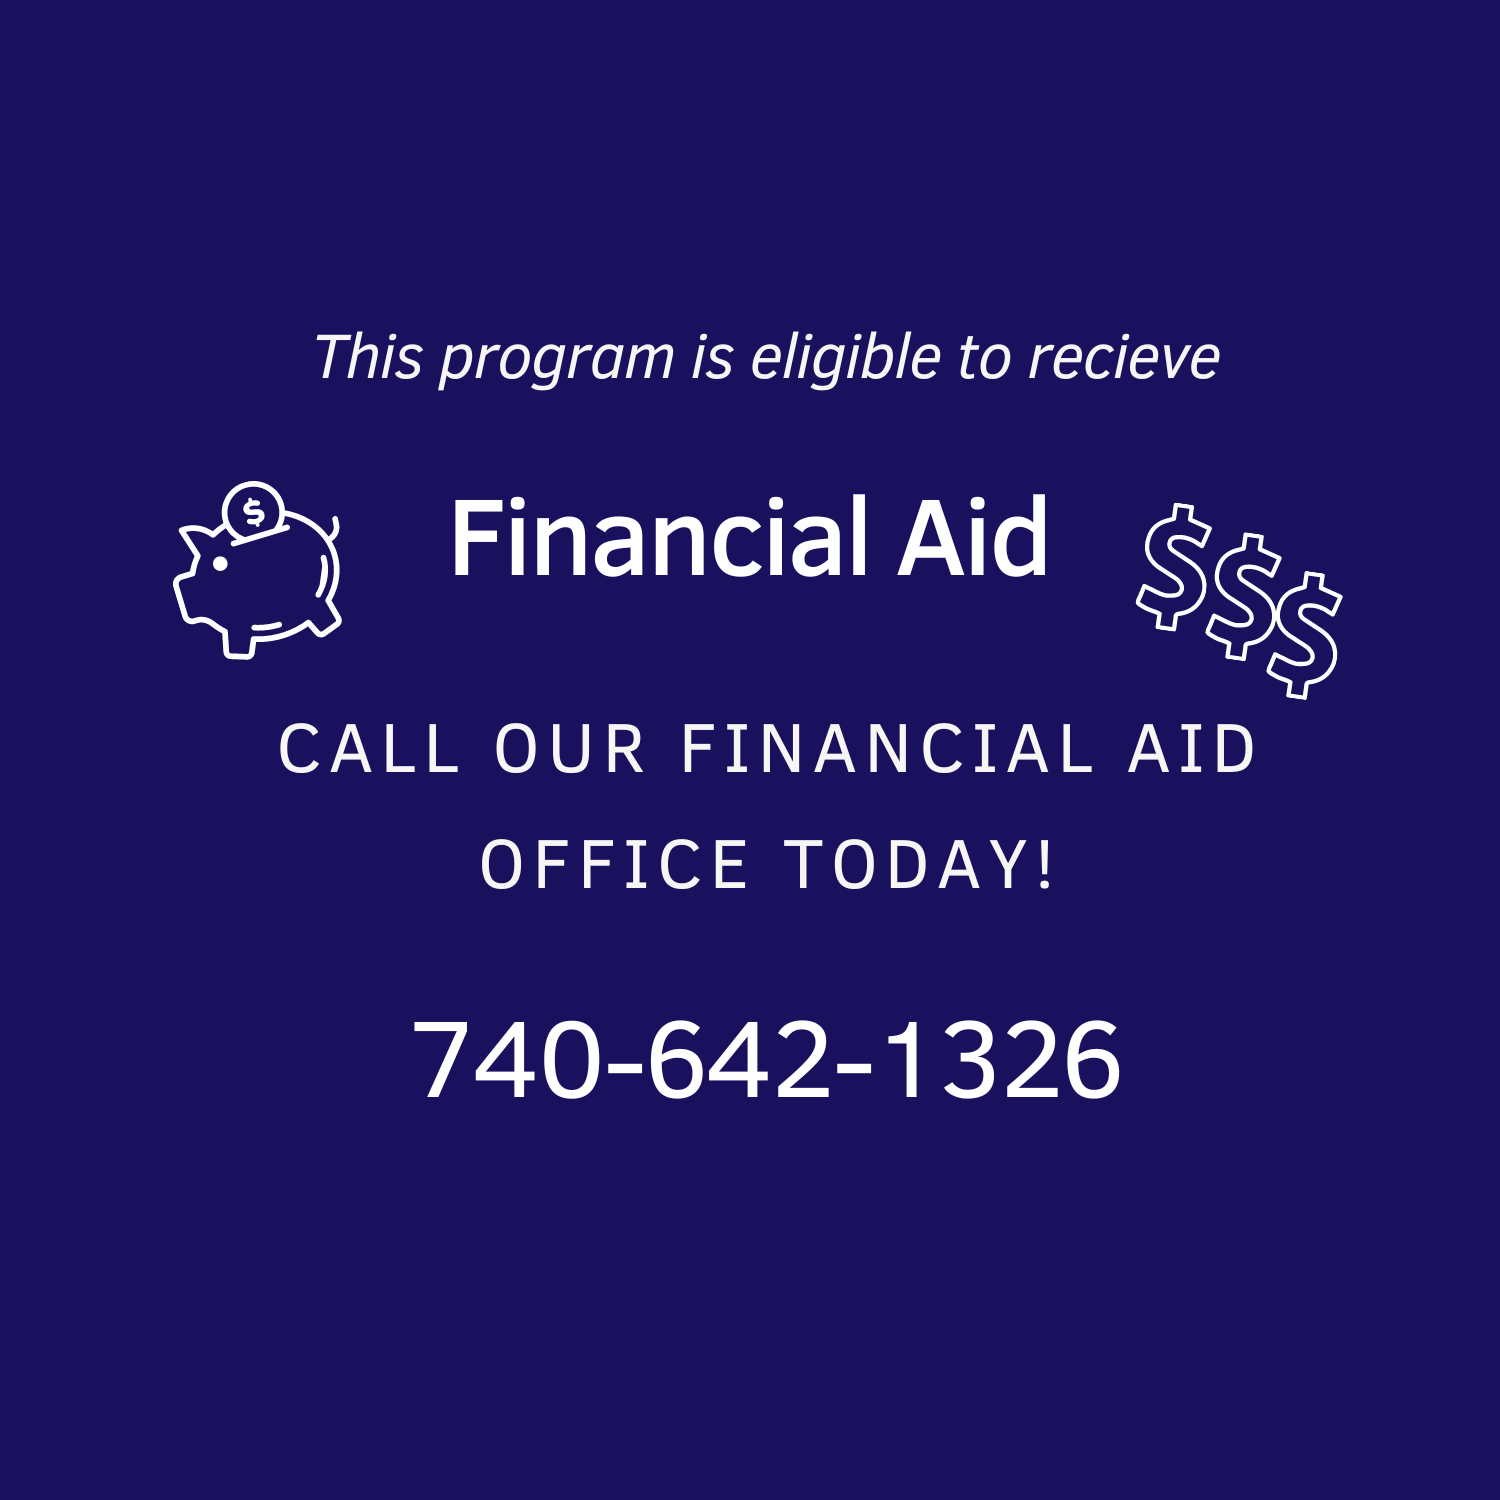 This program is eligible for Financial Aid